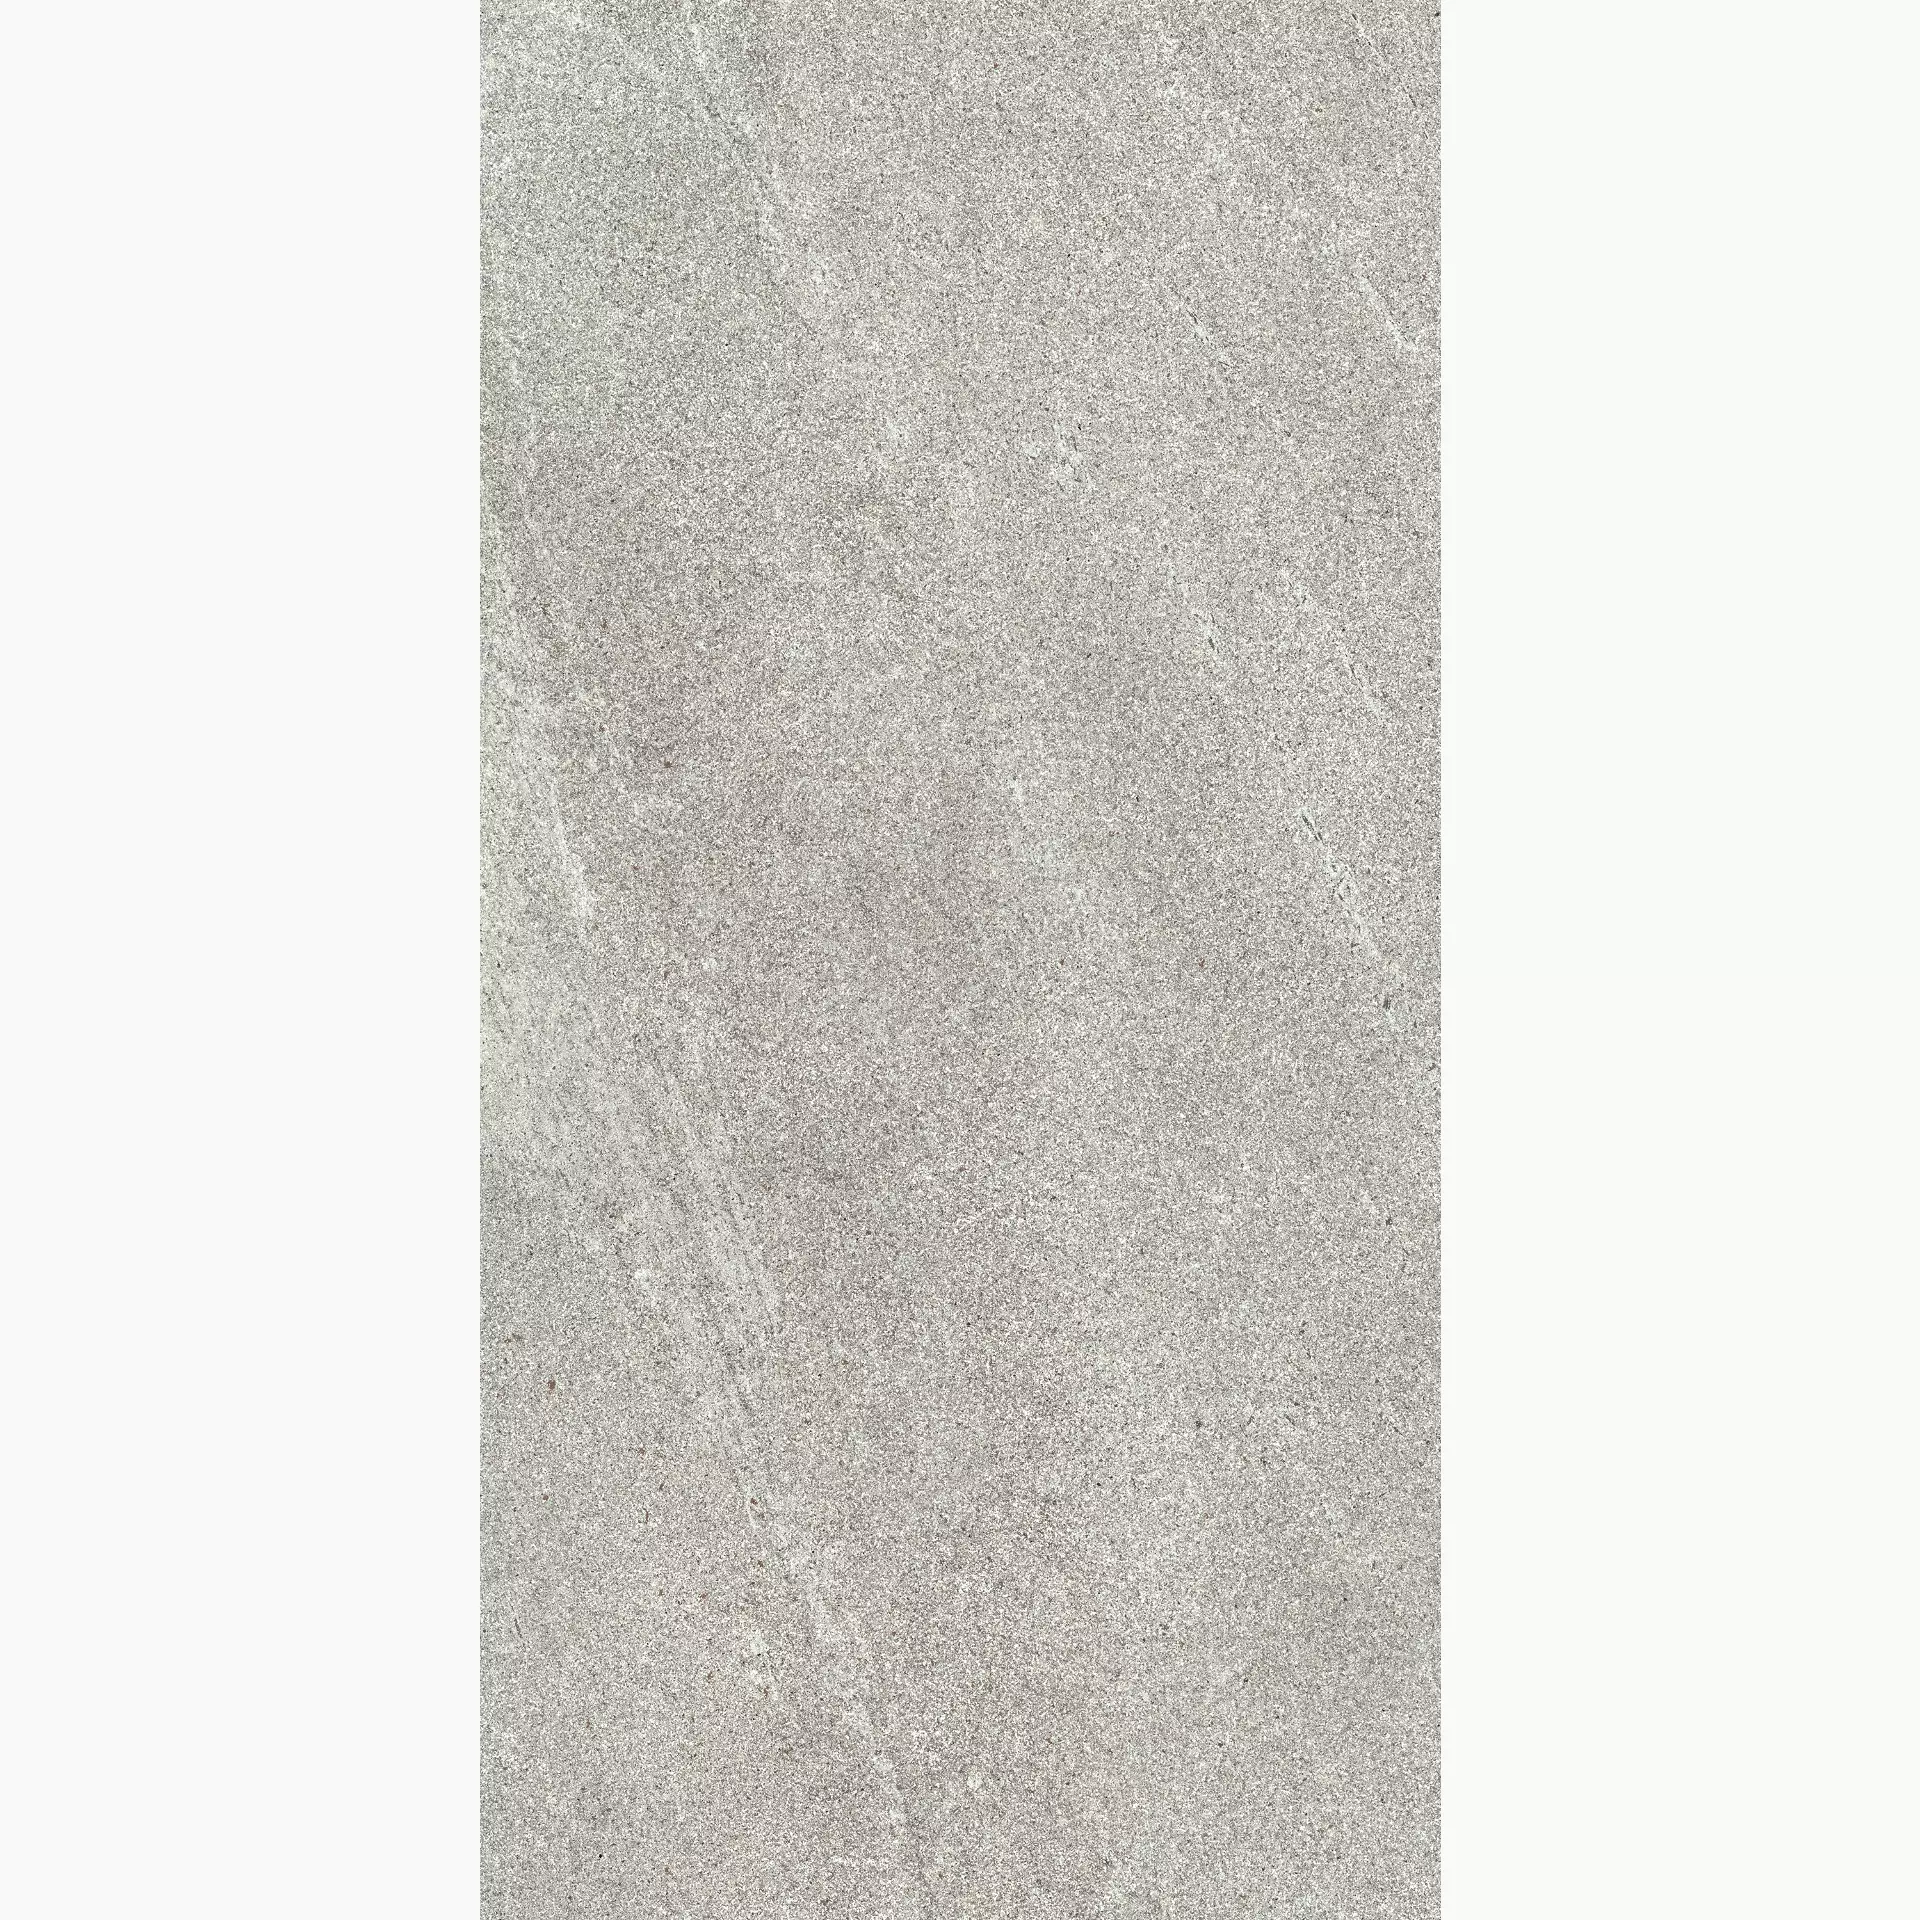 Cottodeste Blend Stone Light Hammered Protect EGXBS70 60x120cm rectified 20mm